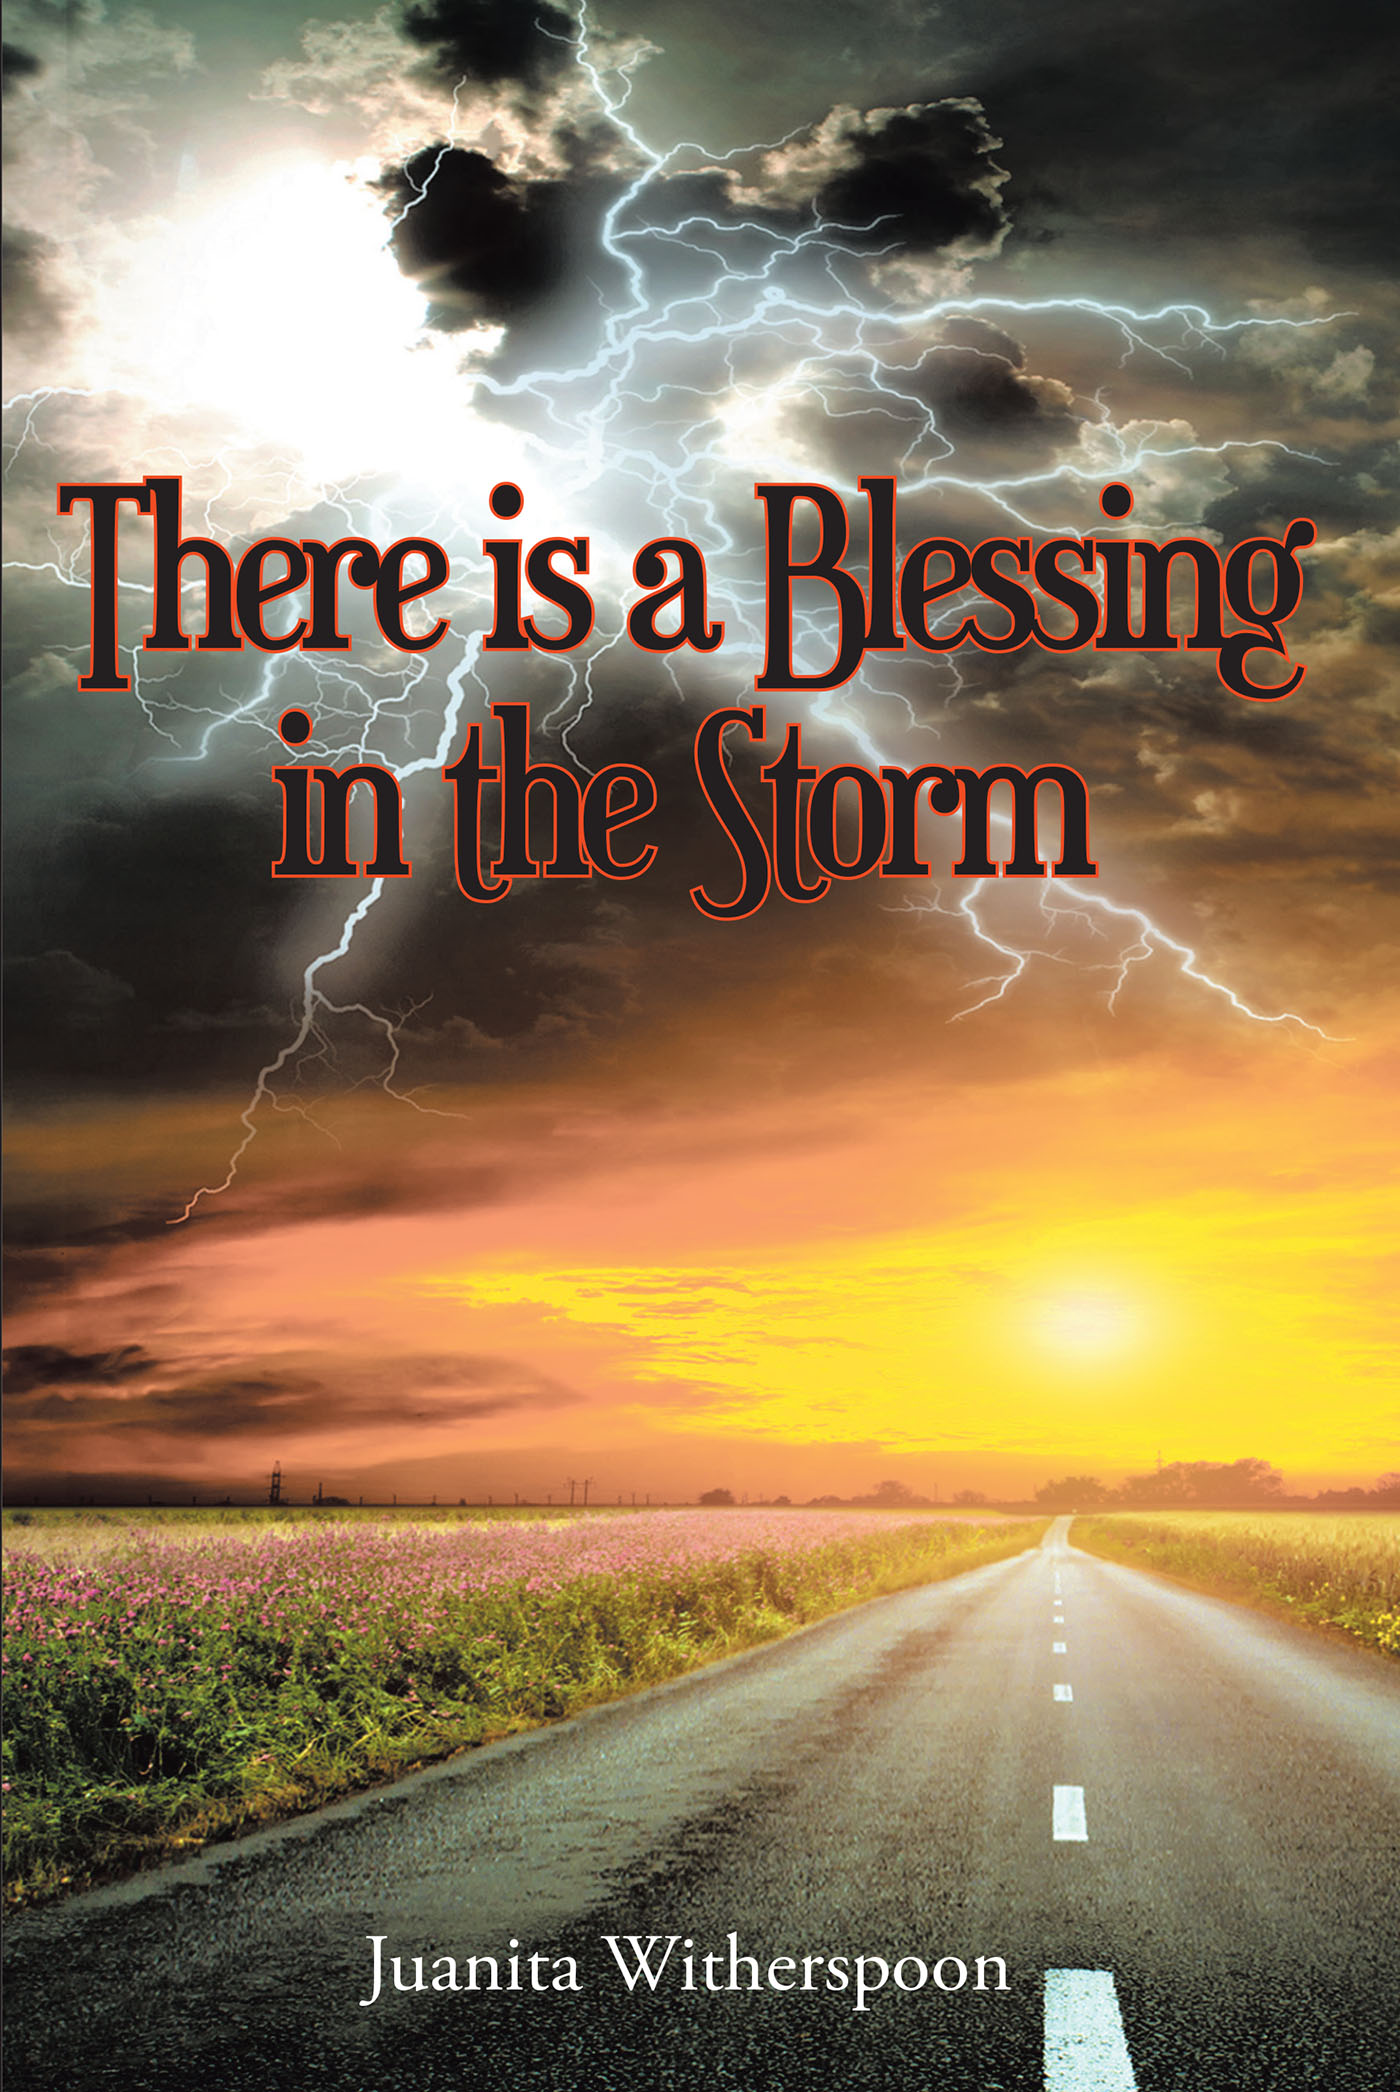 Juanita Witherspoon’s Newly Released "There Is a Blessing in the Storm" is a Touching Story of Redemption and Forgiveness